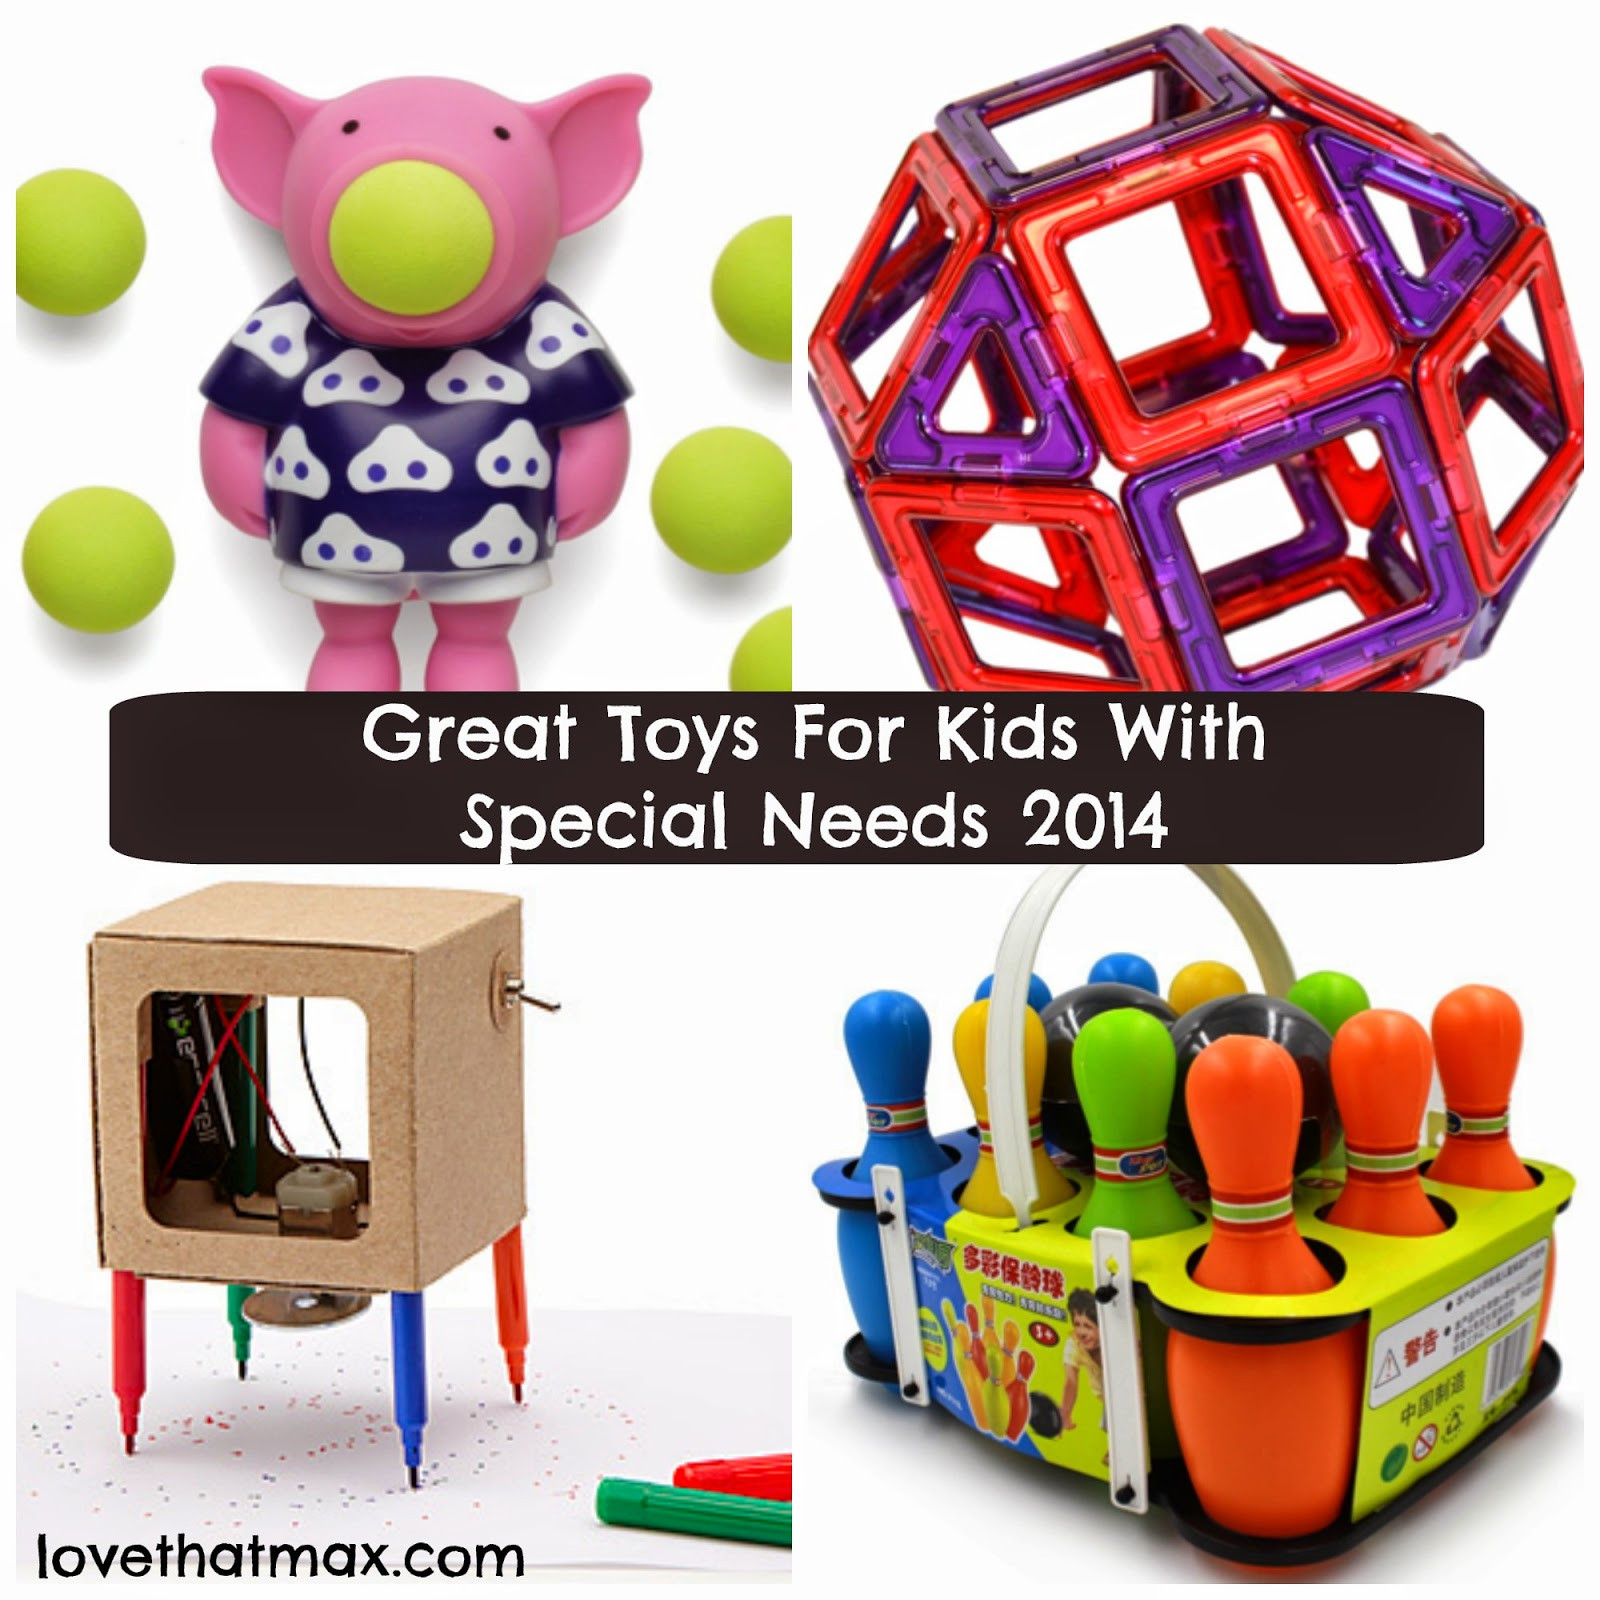 Gifts For Special Needs Kids
 Love That Max Holiday Gifts And Toys For Kids With